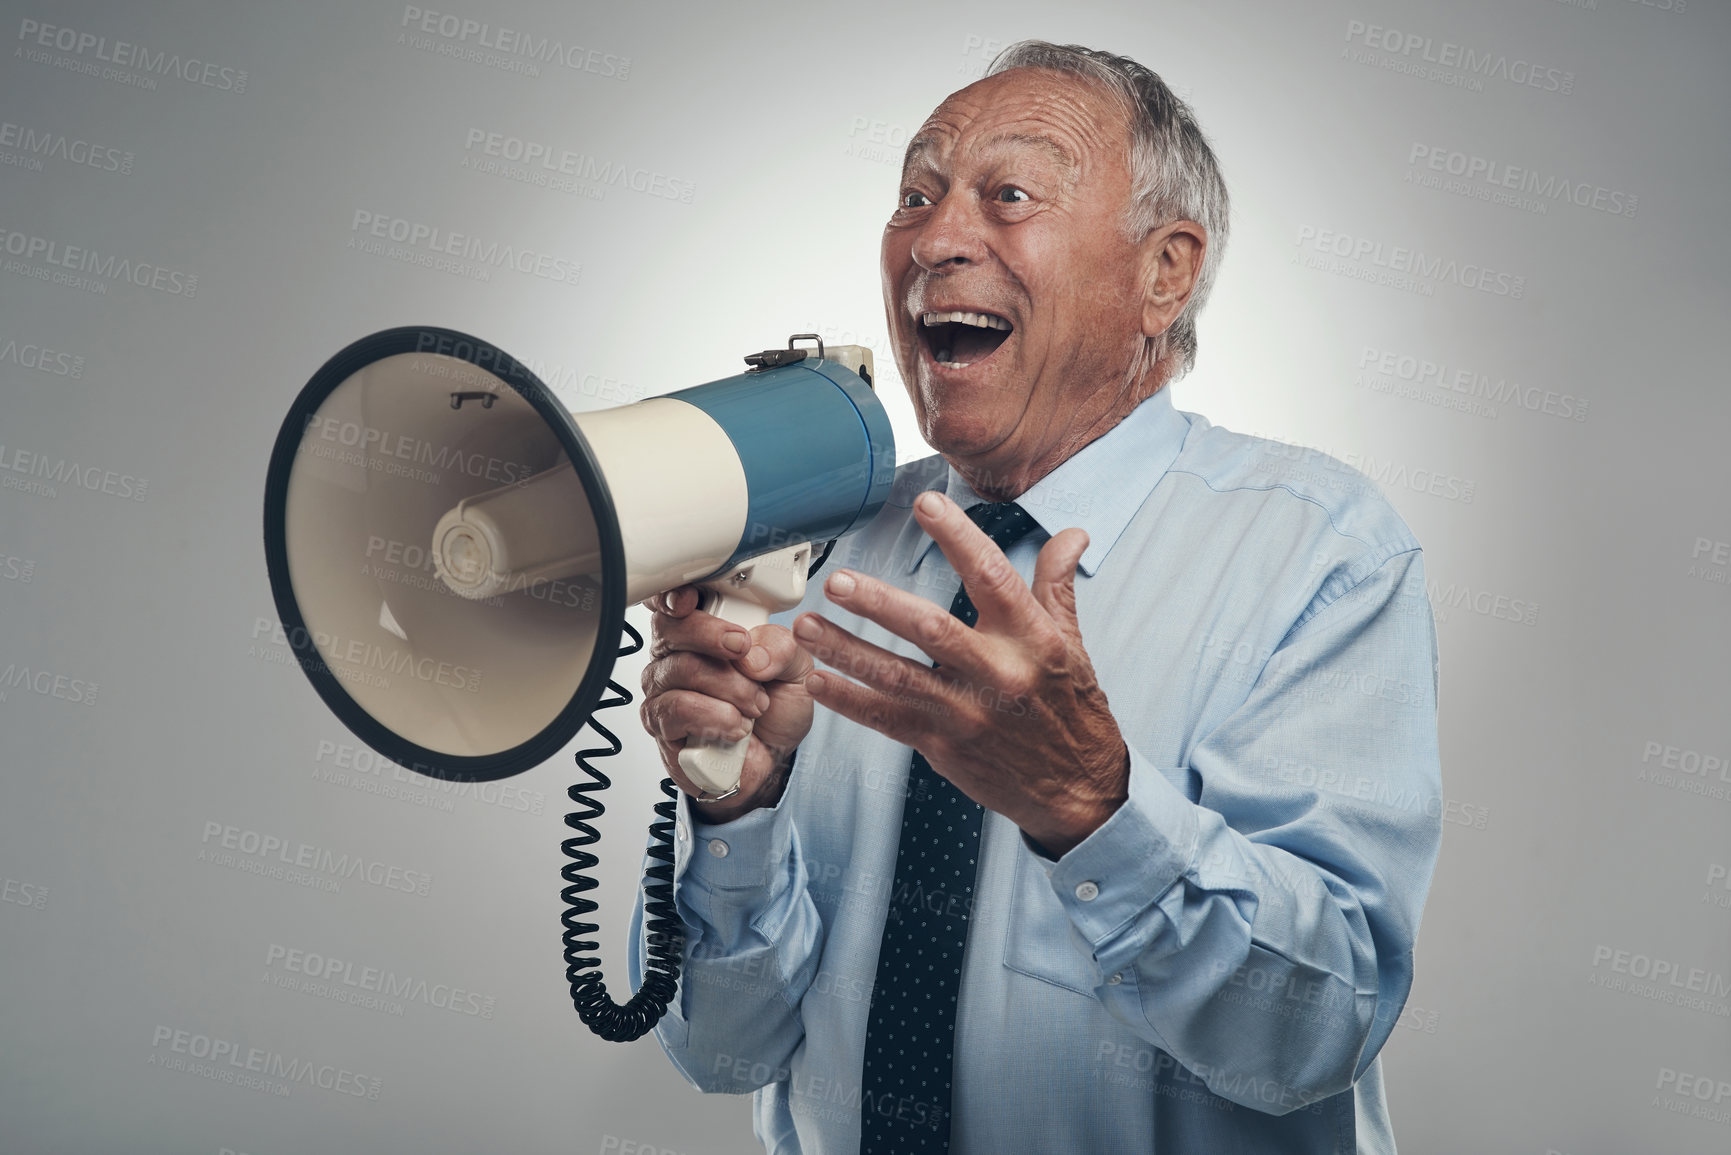 Buy stock photo Shot of a senior businessman standing alone against a grey background in the studio and using a megaphone